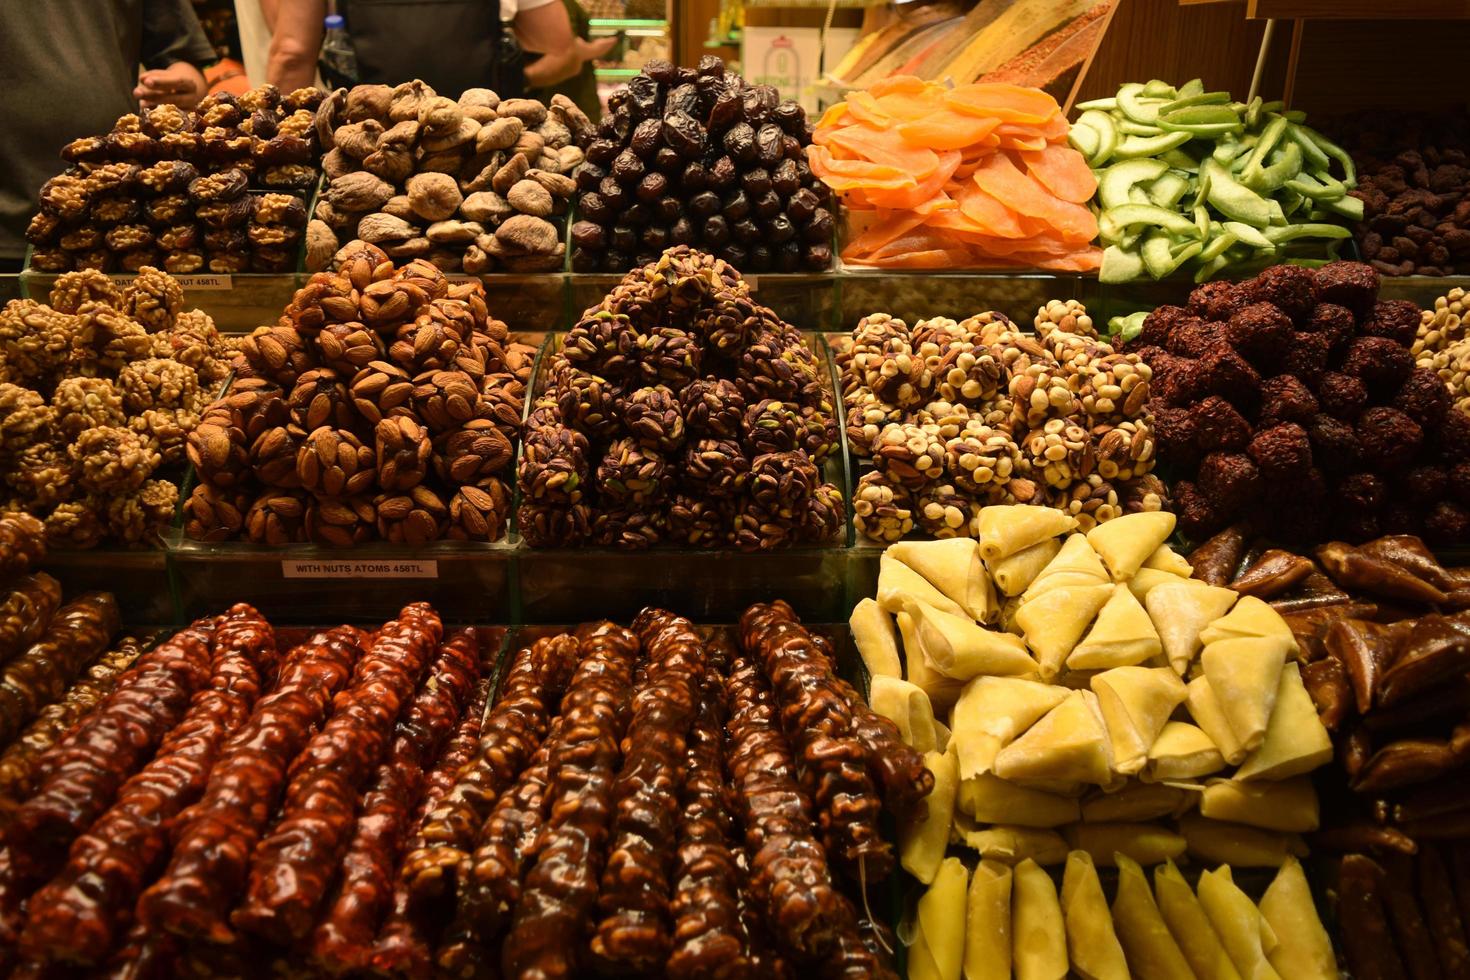 Egyptian bazaar in Istanbul, Turkey. A counter with sweets and spices photo